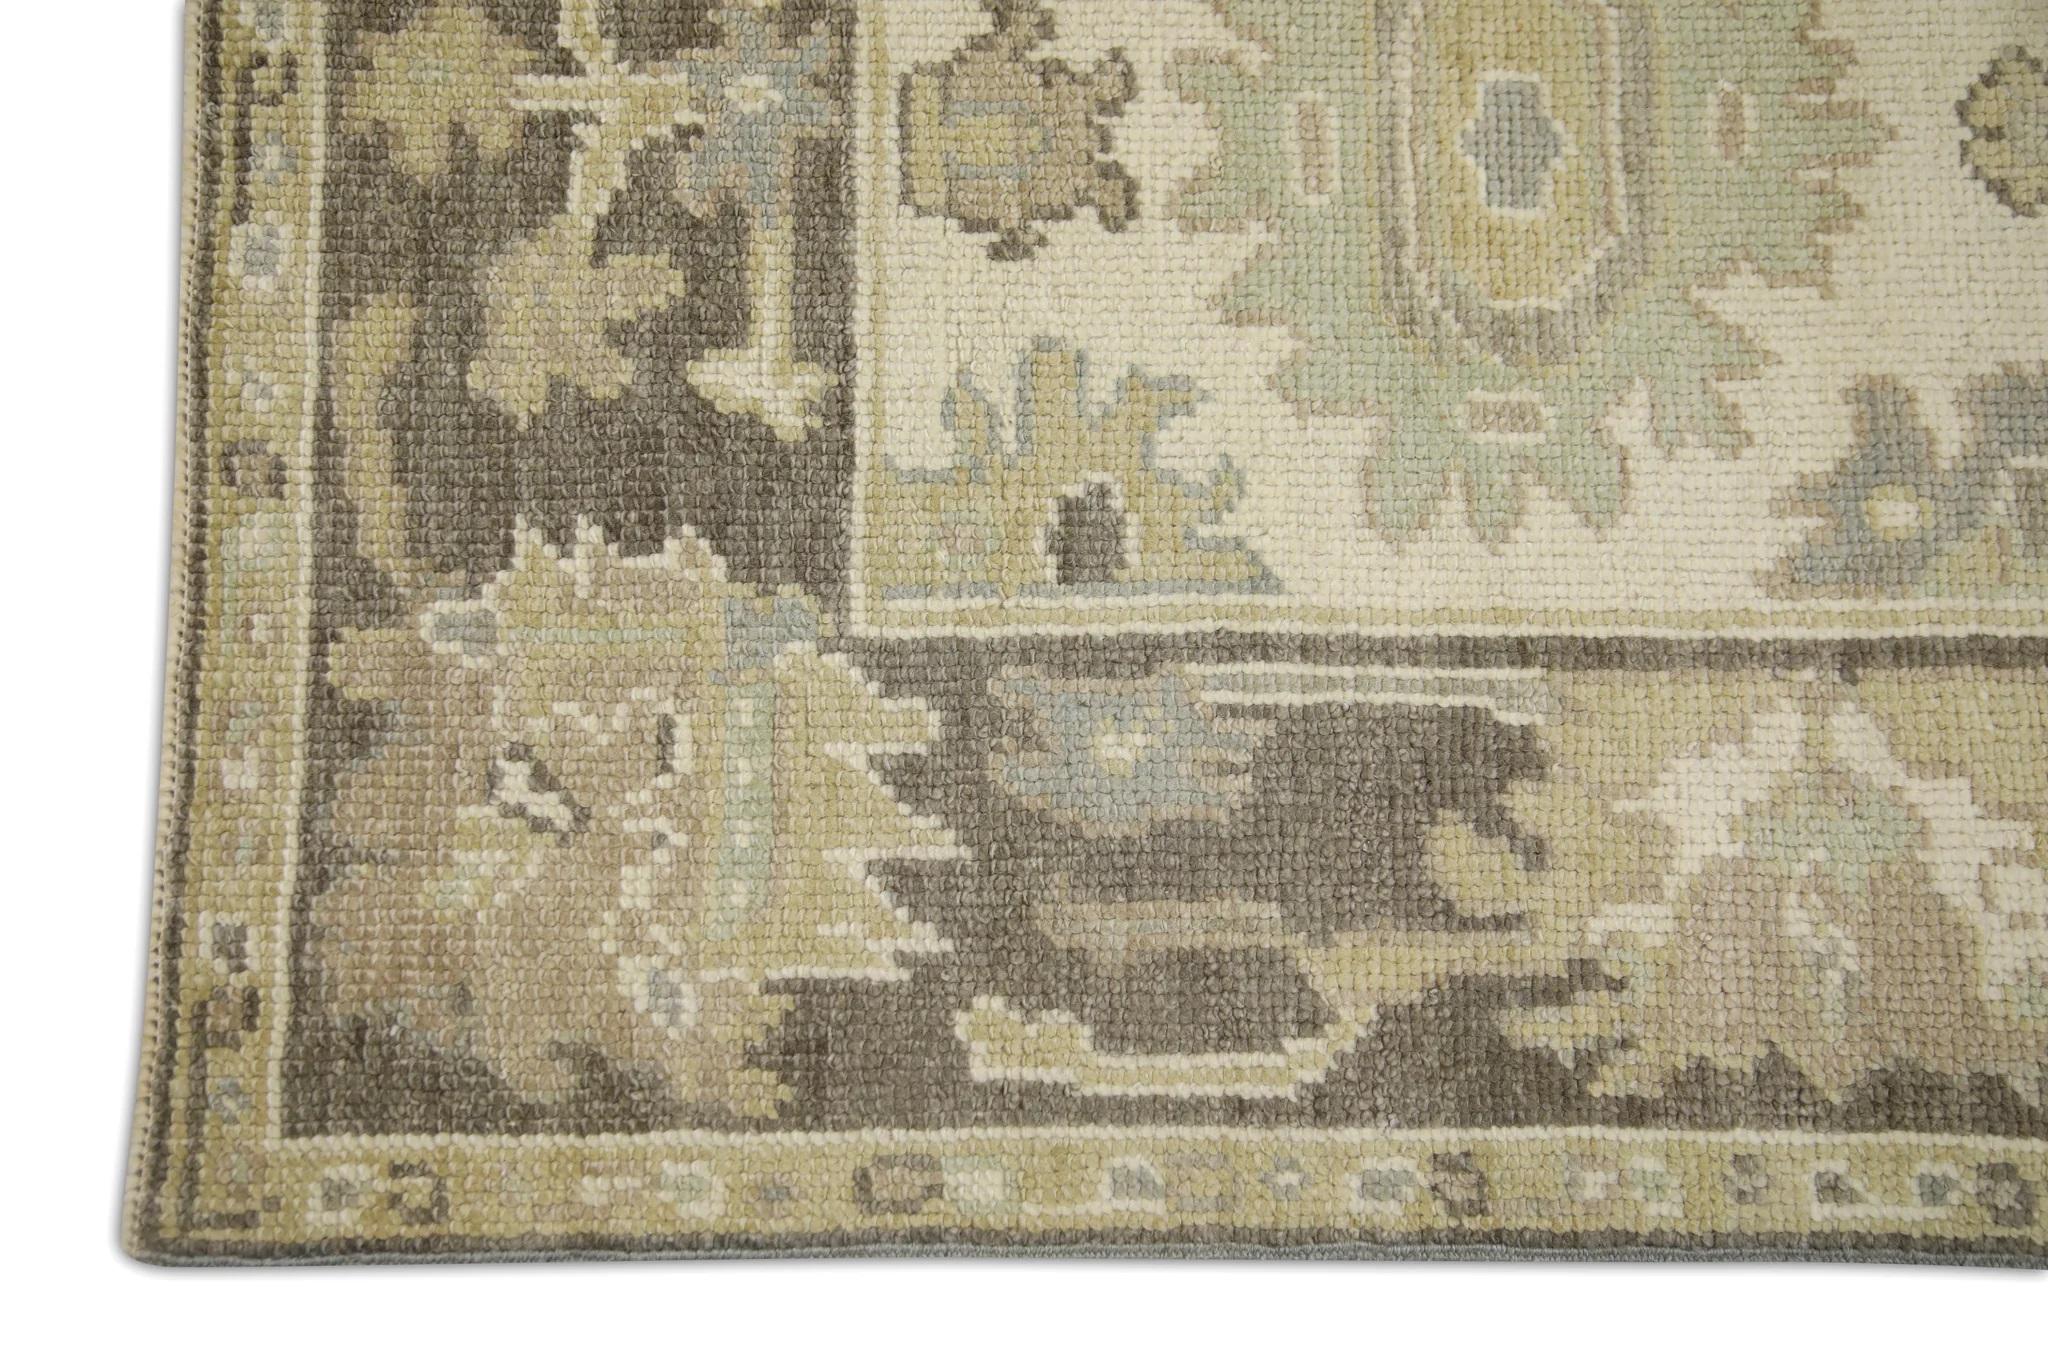 Vegetable Dyed Floral Design Handwoven Wool Turkish Oushak Rug in Brown and Green 2'10